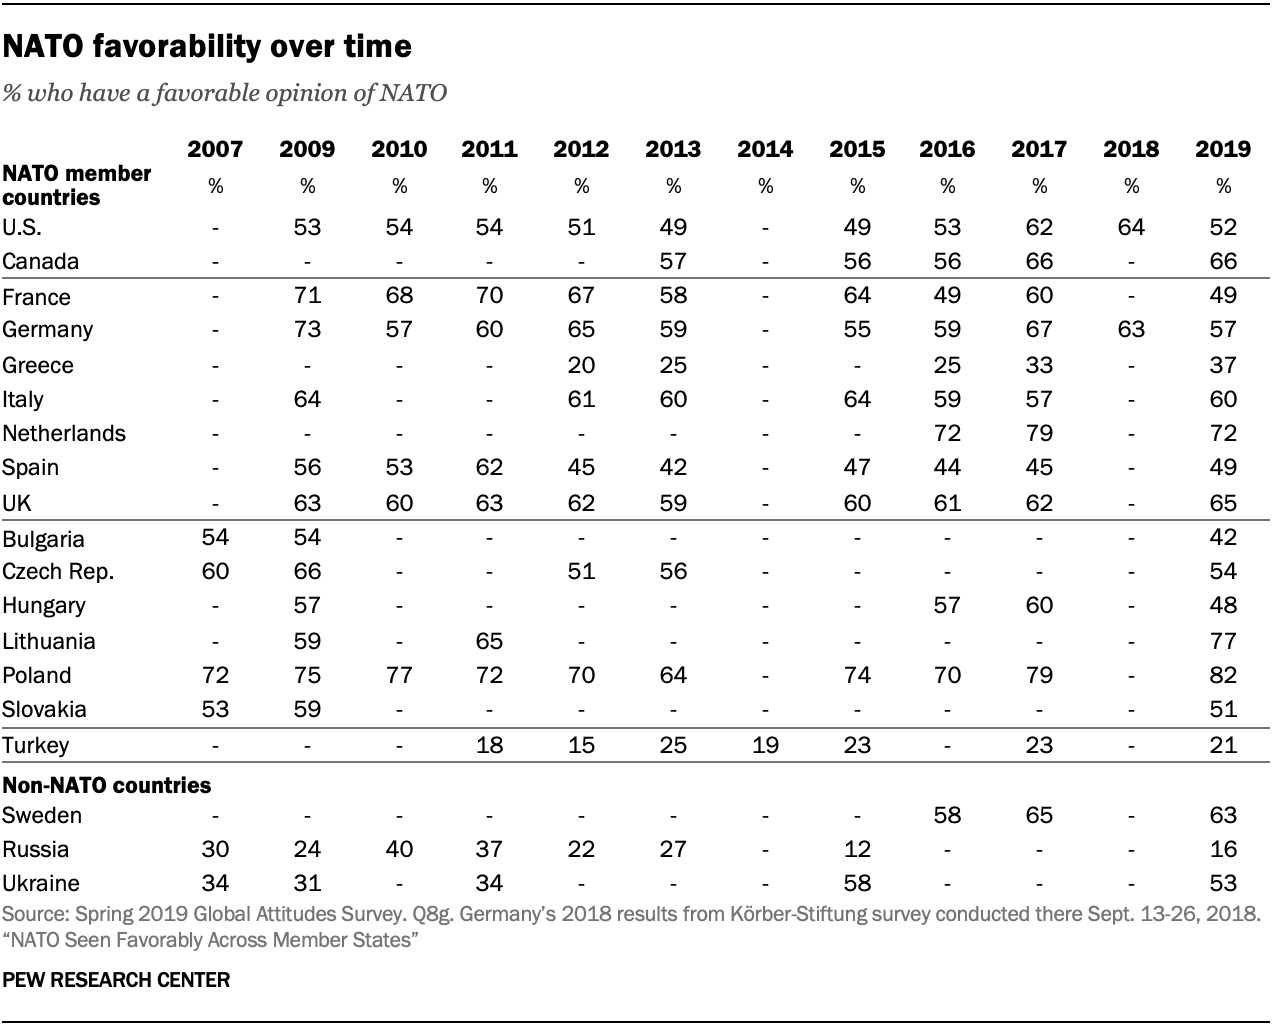 A table showing NATO favorability over time